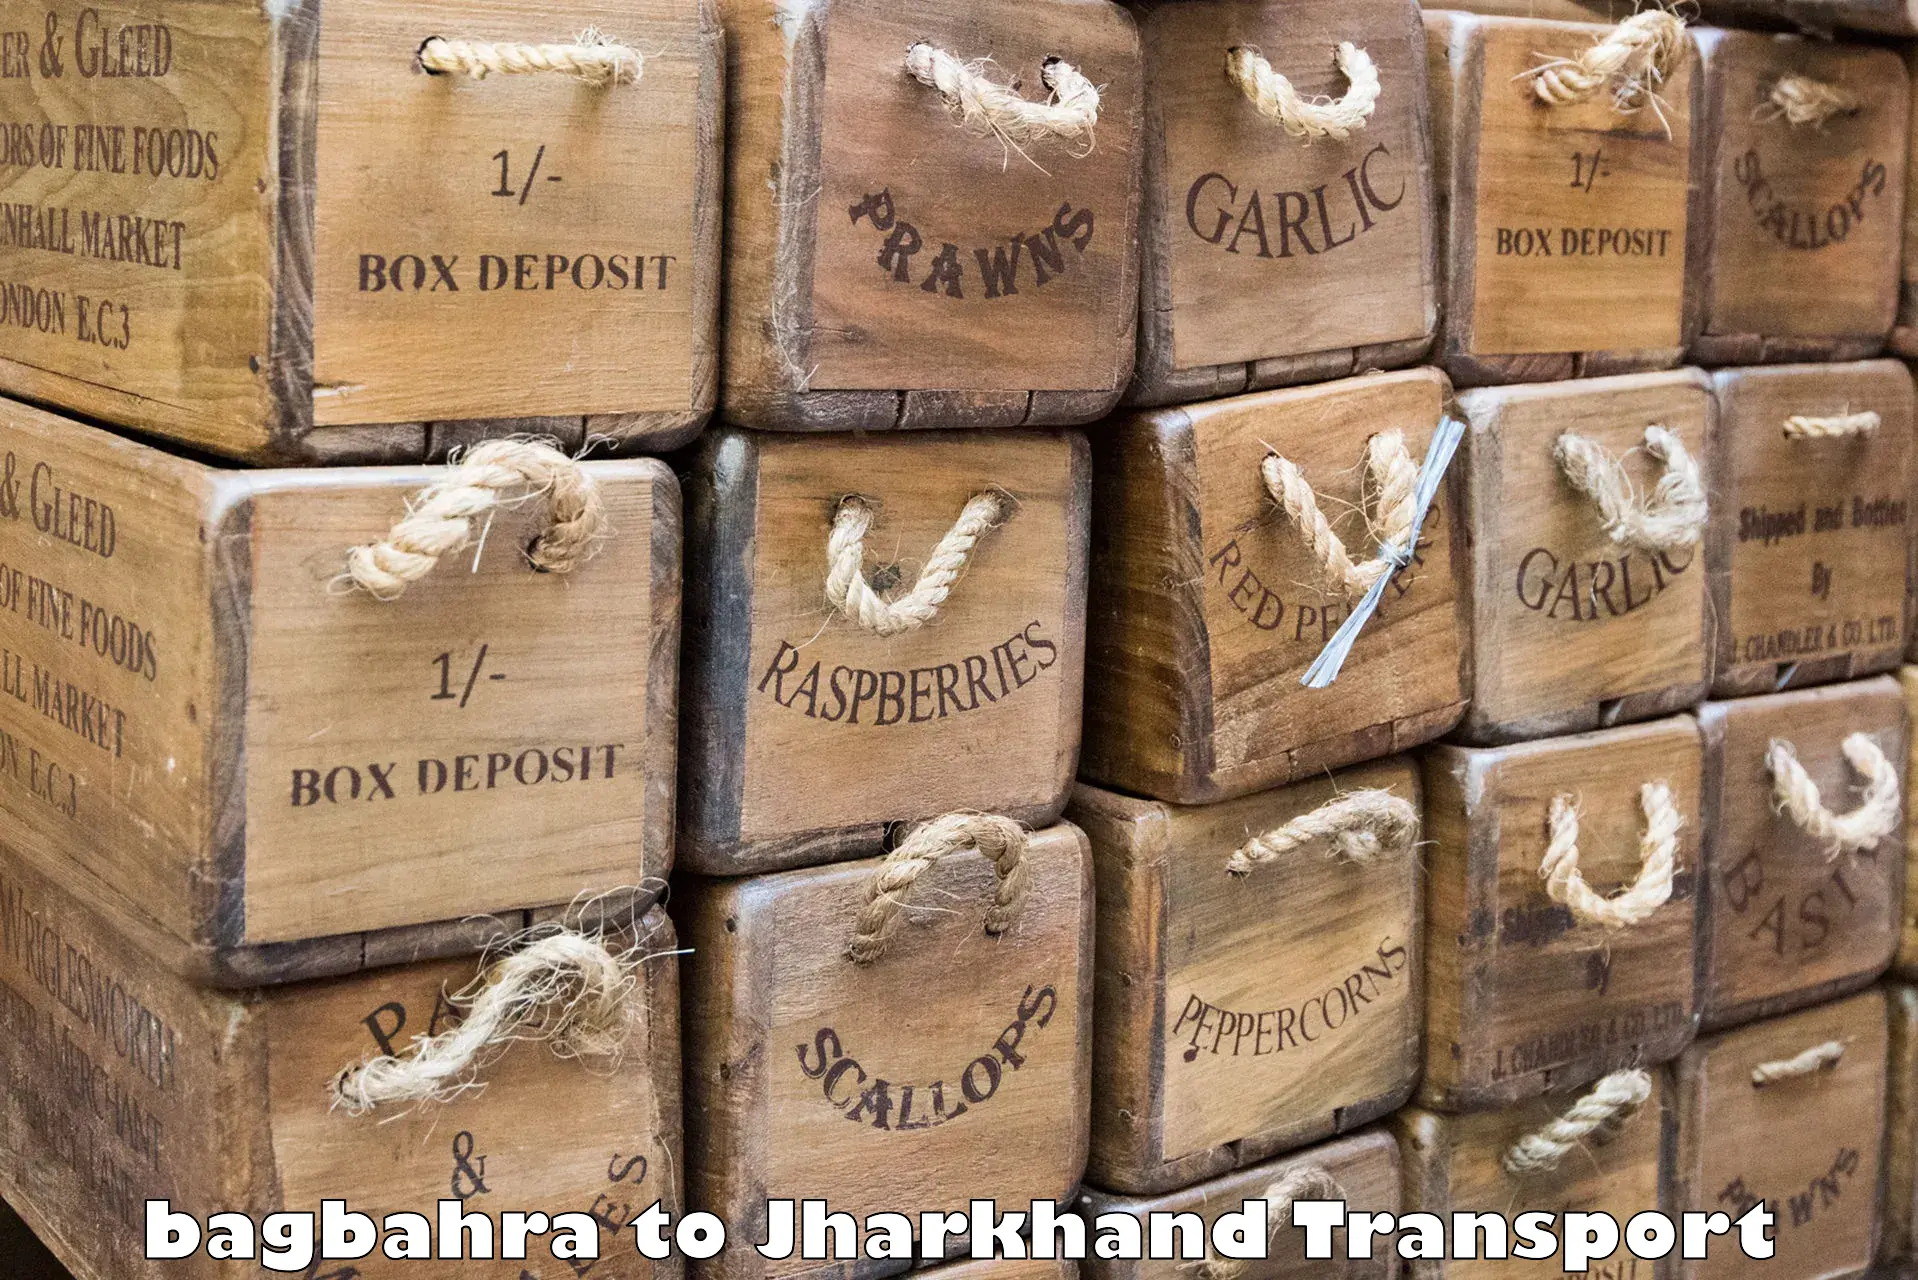 Lorry transport service in bagbahra to Topchanchi